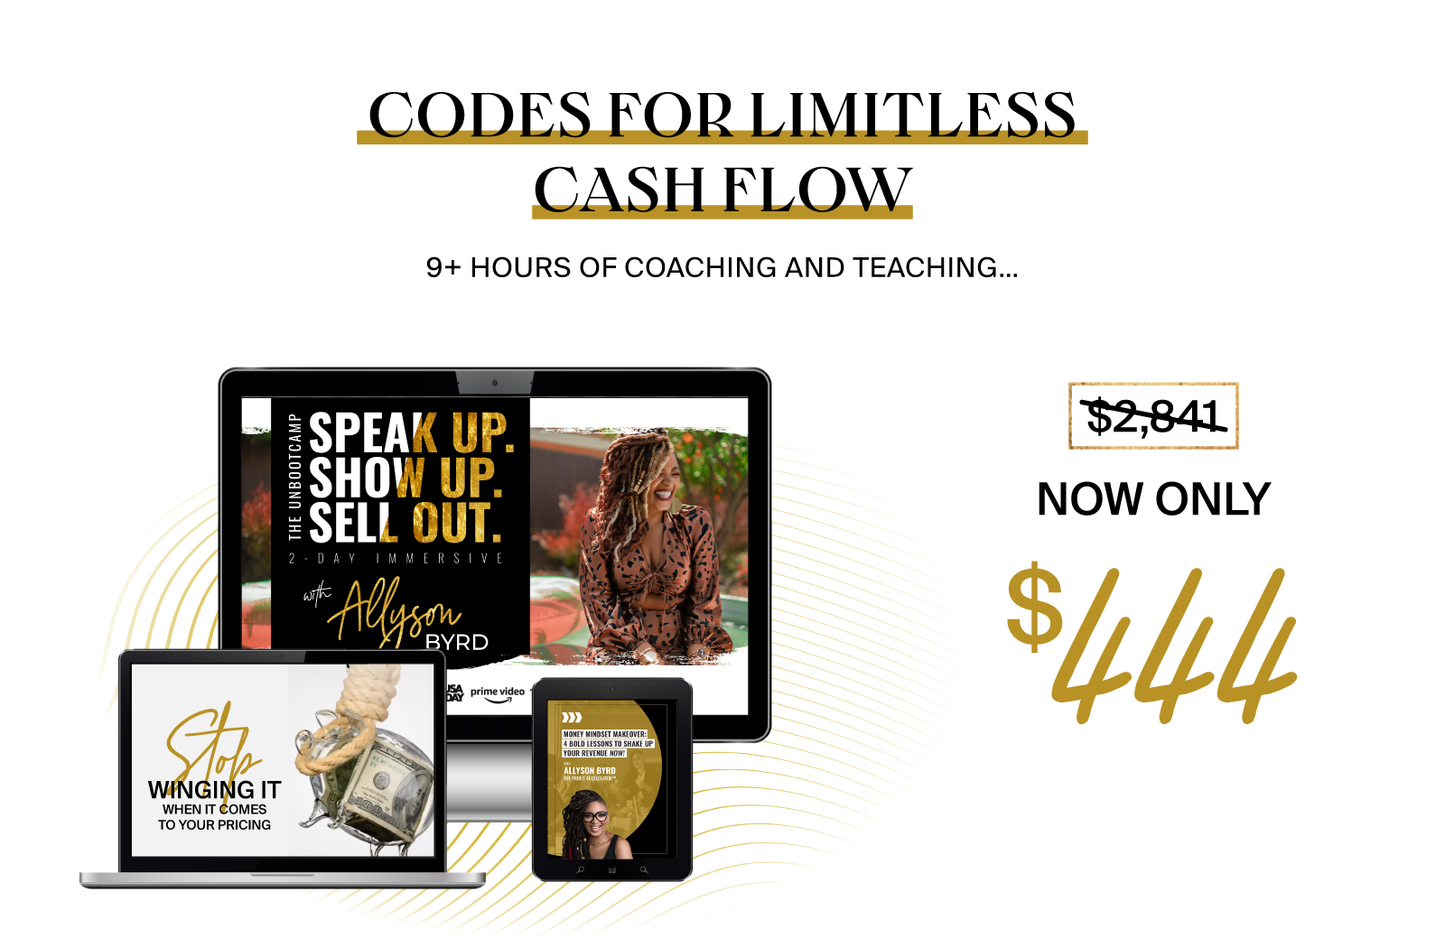 Codes for Limitless Cash Flow